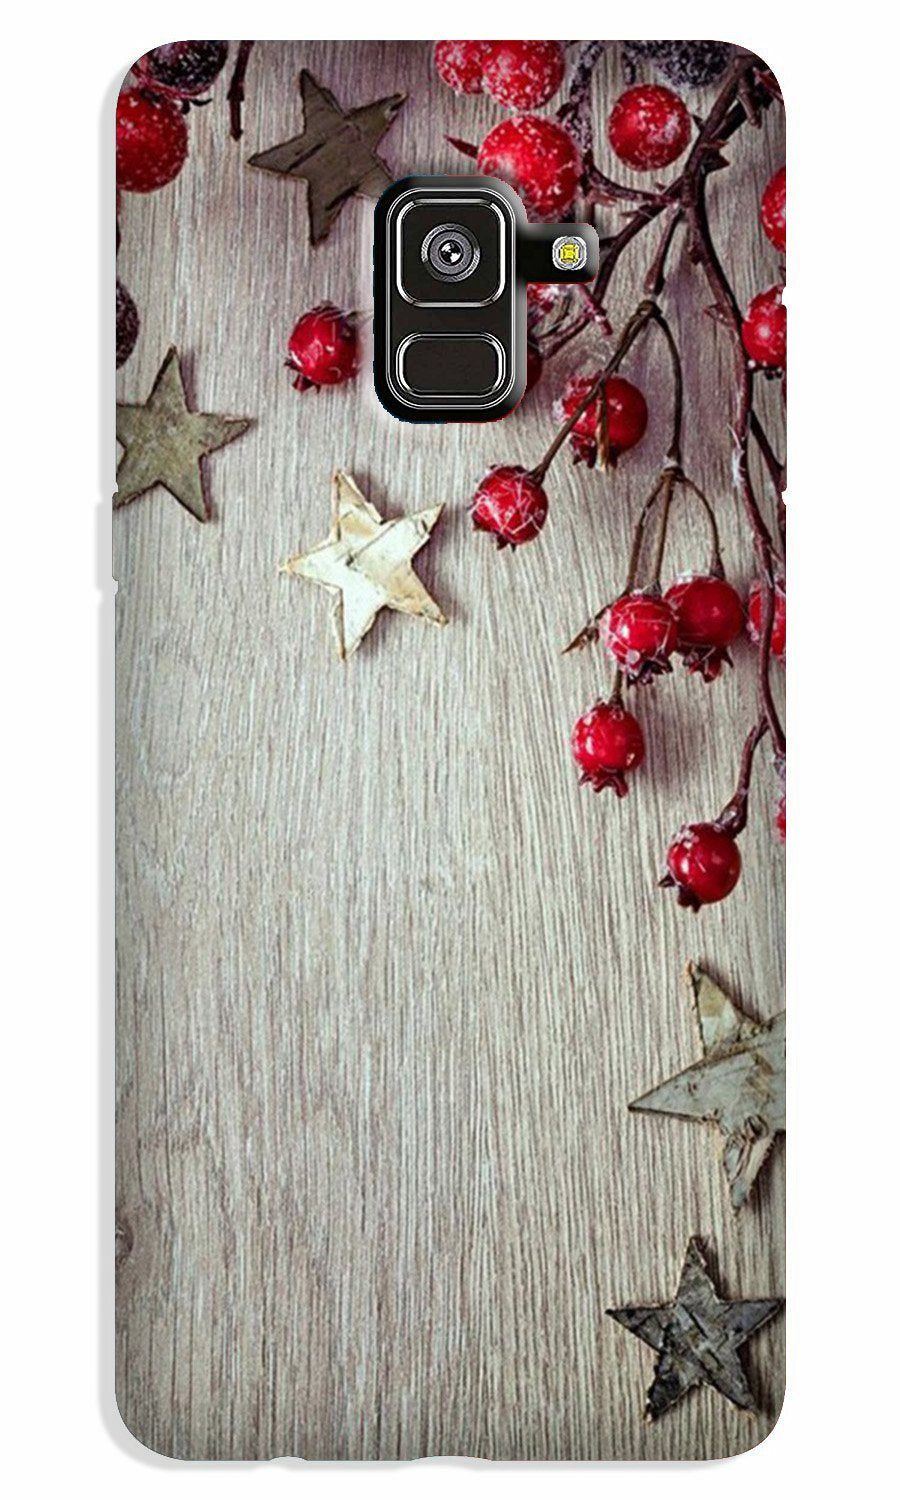 Stars Case for Galaxy J6 / On6